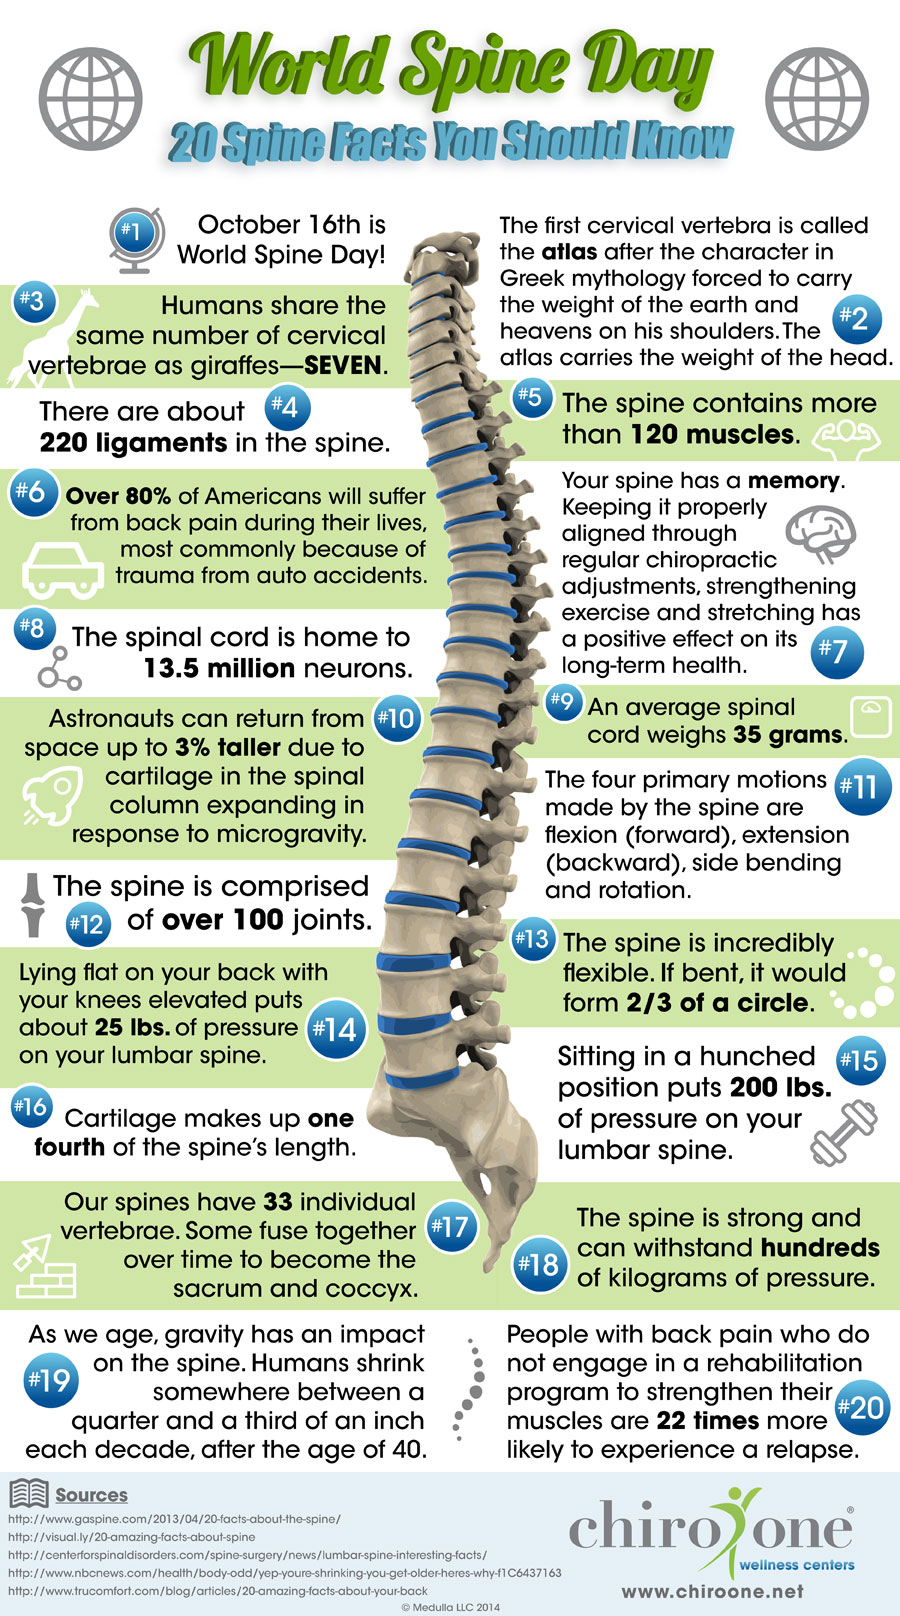 20 fun facts to learn in celebration of World Spine Day